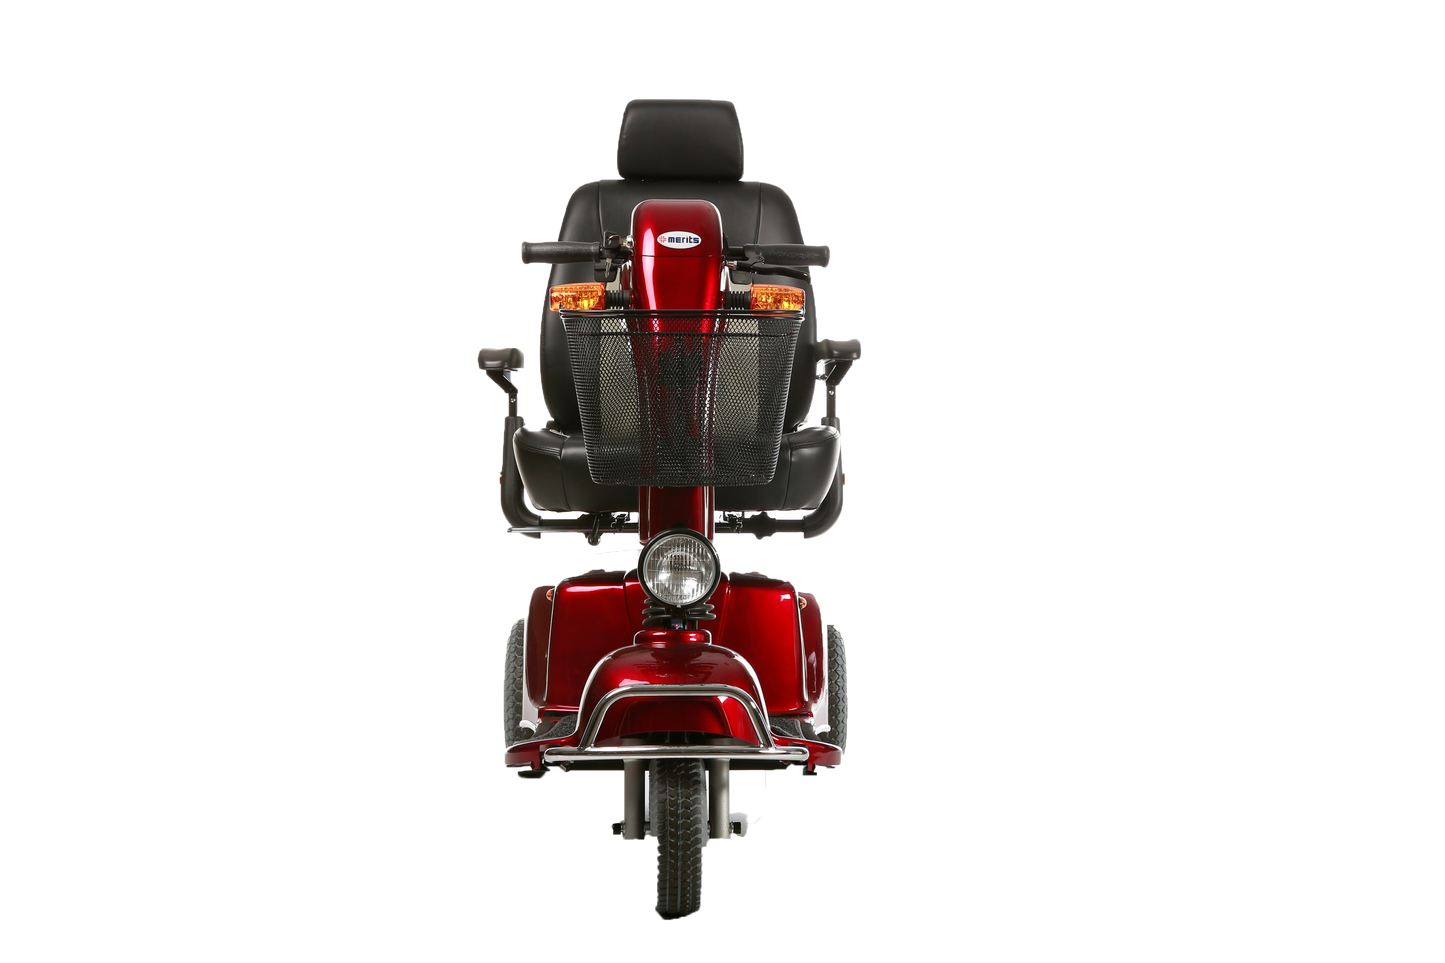 Merits Health Pioneer 9 Electric 3-Wheel Mobility Scooter S331